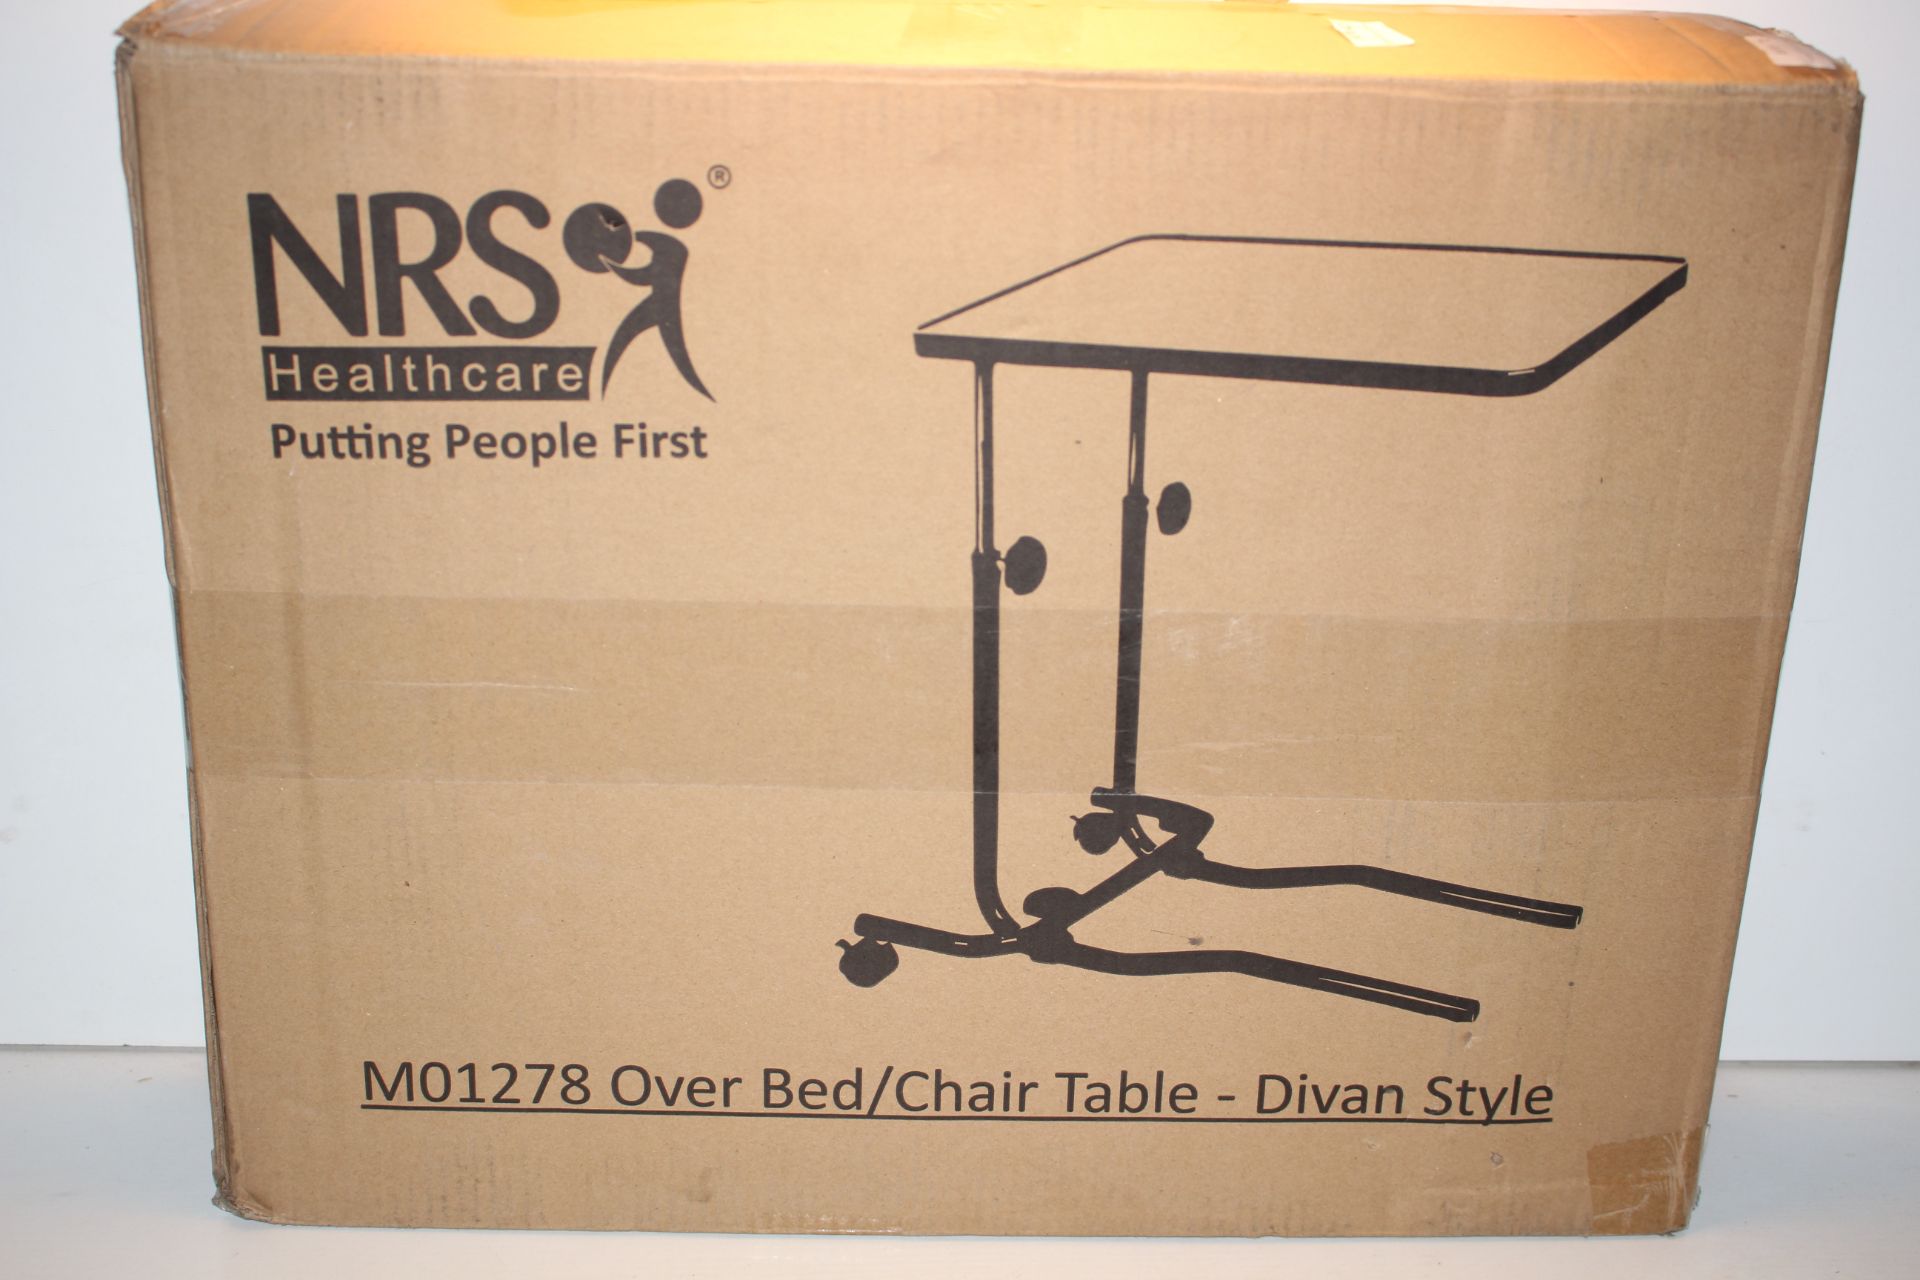 BOXED NRS HEALTHCARE OVERBED/CHAIR TABLE - DIVAN STYLE M01278 RRP £49.98Condition ReportAppraisal